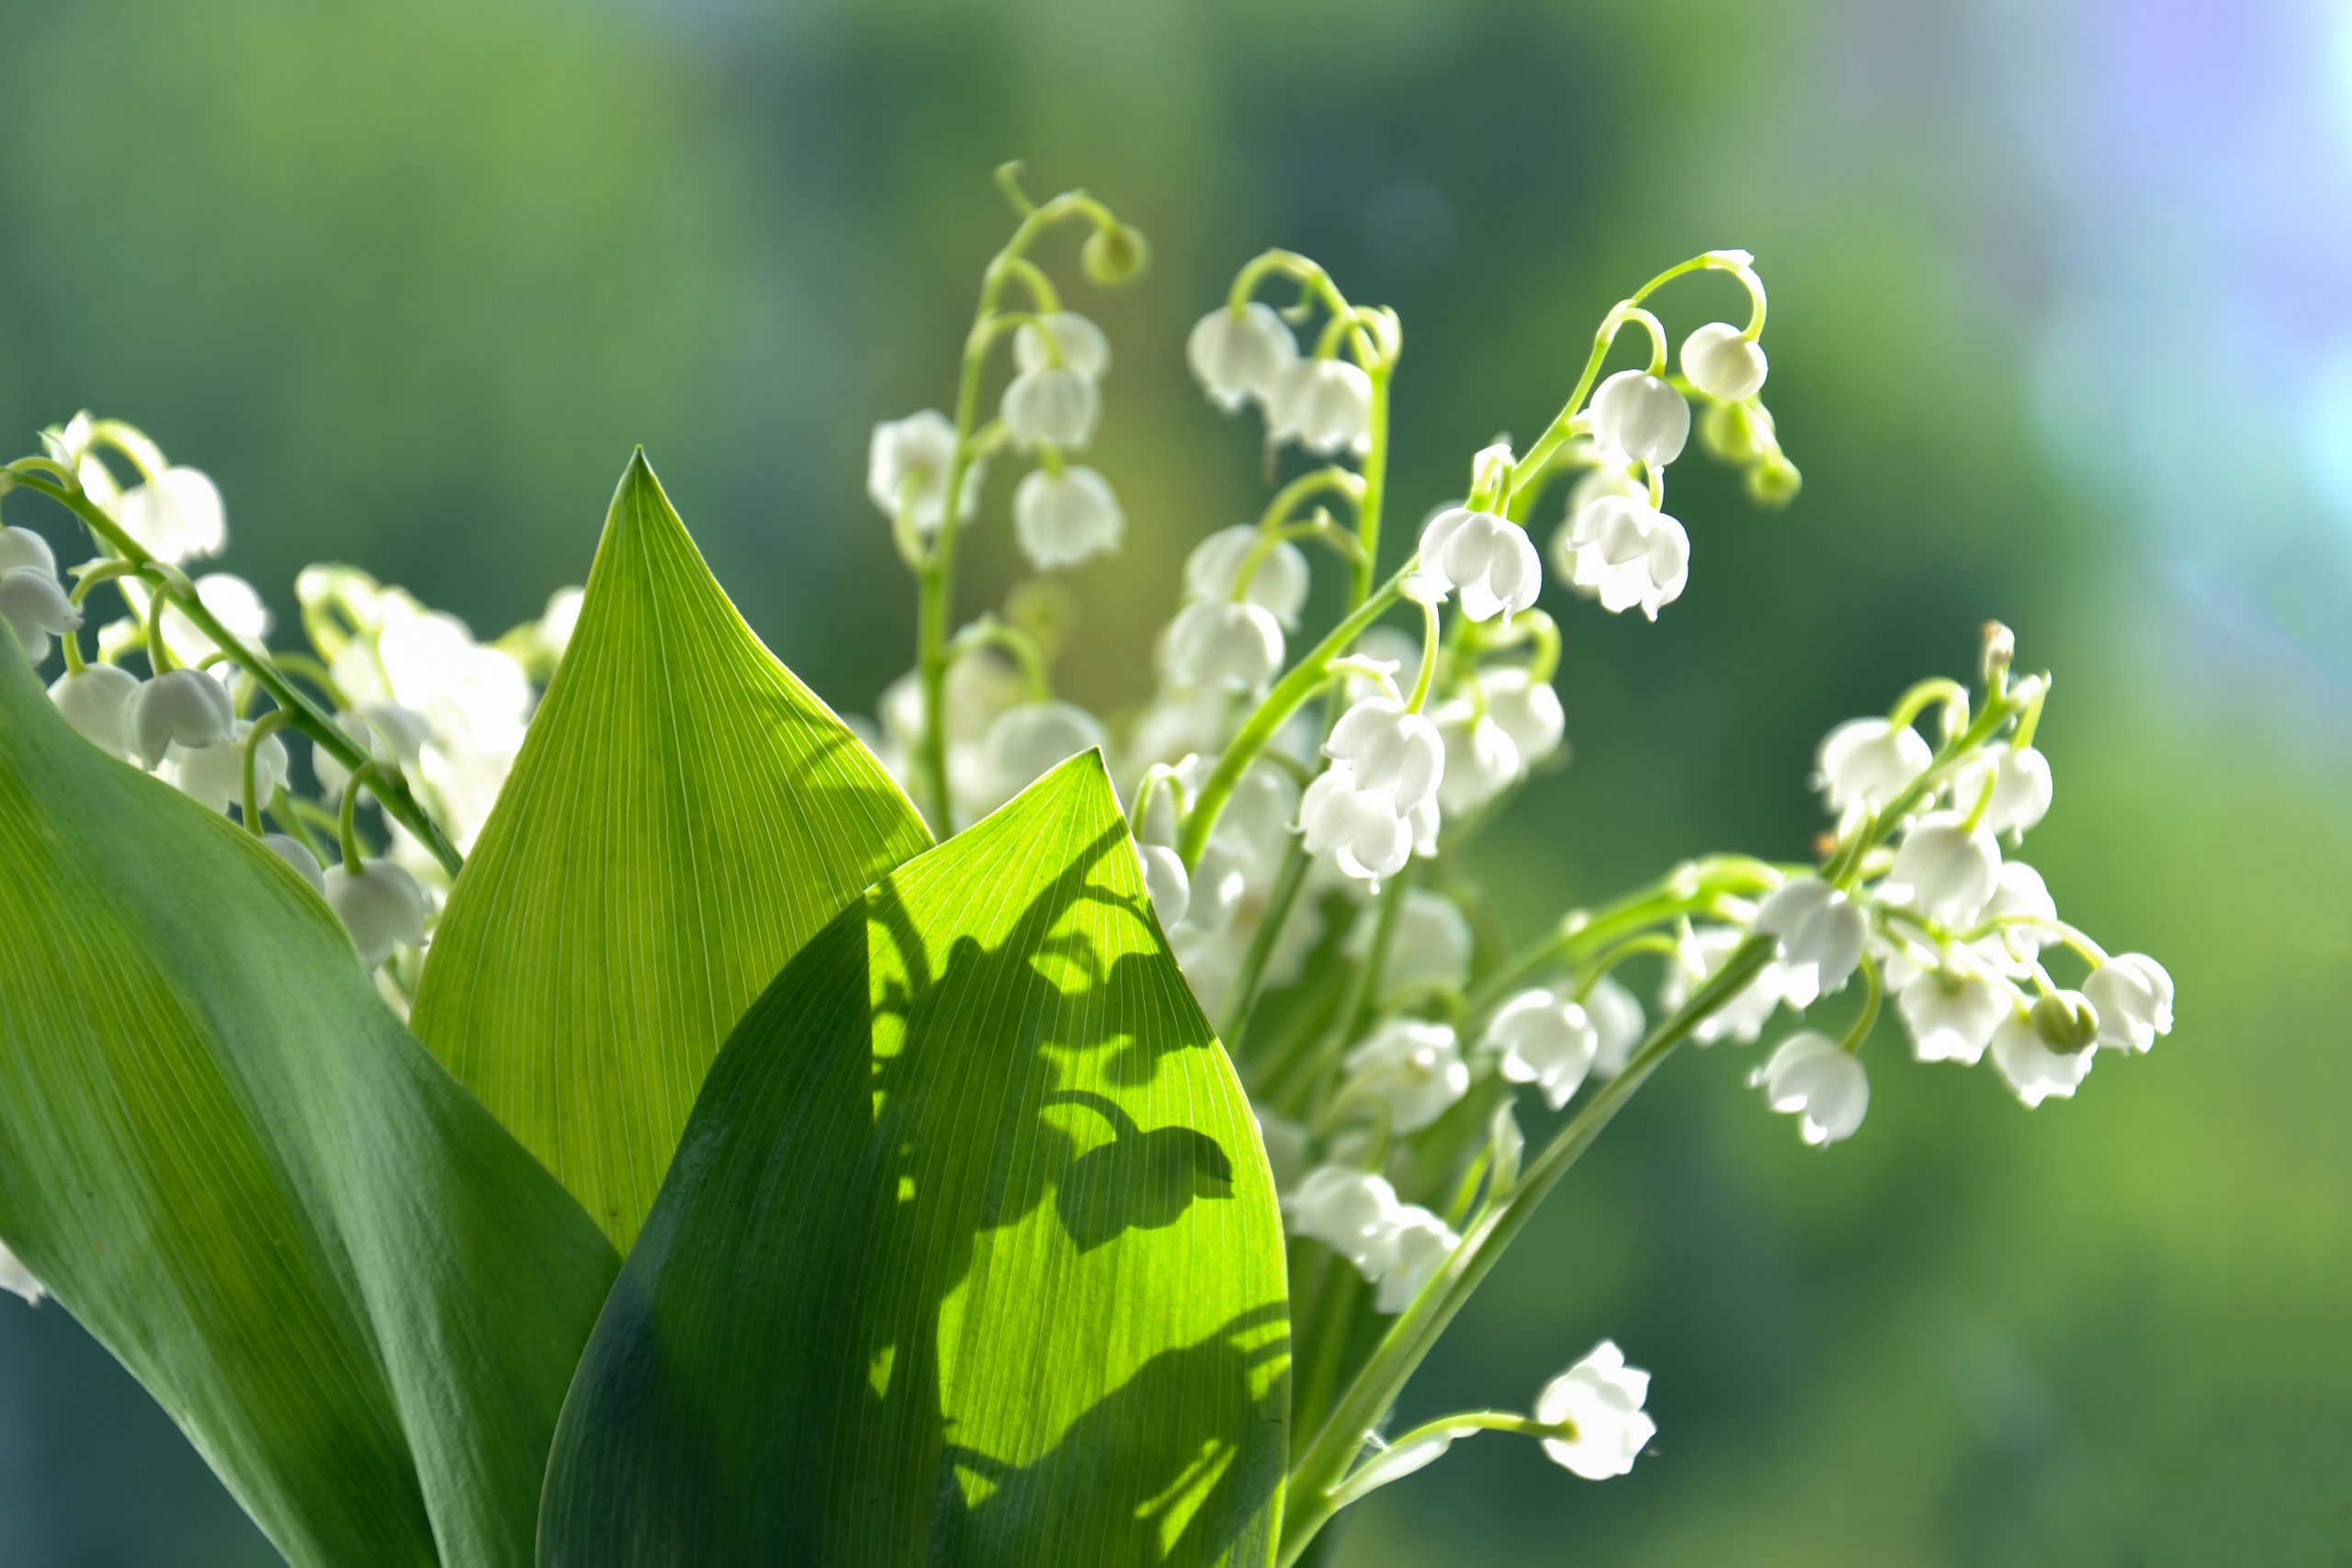 Lily of the valley perfume